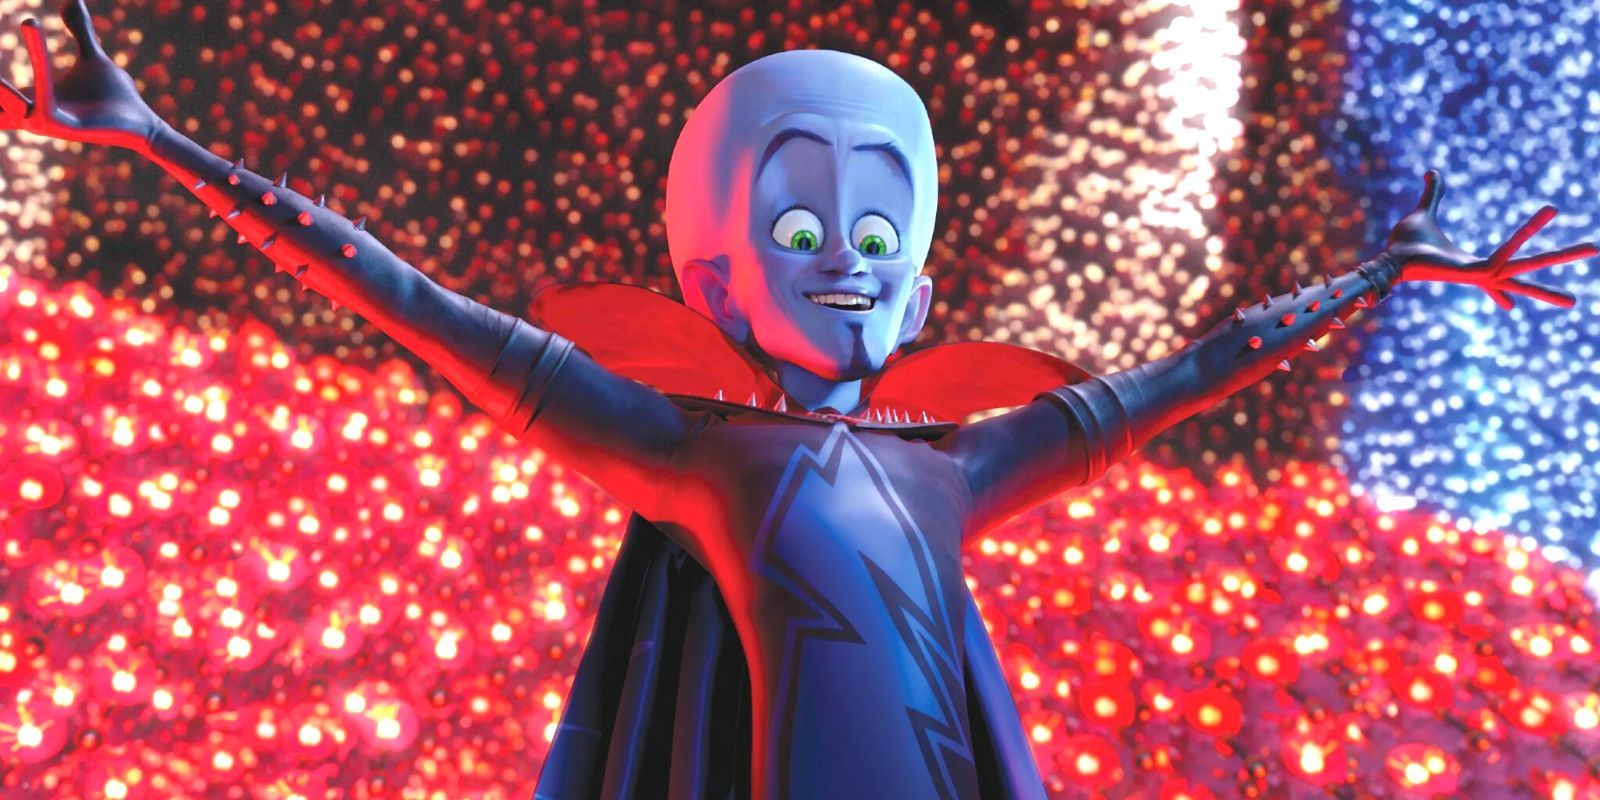 megamind surrounded by red lights